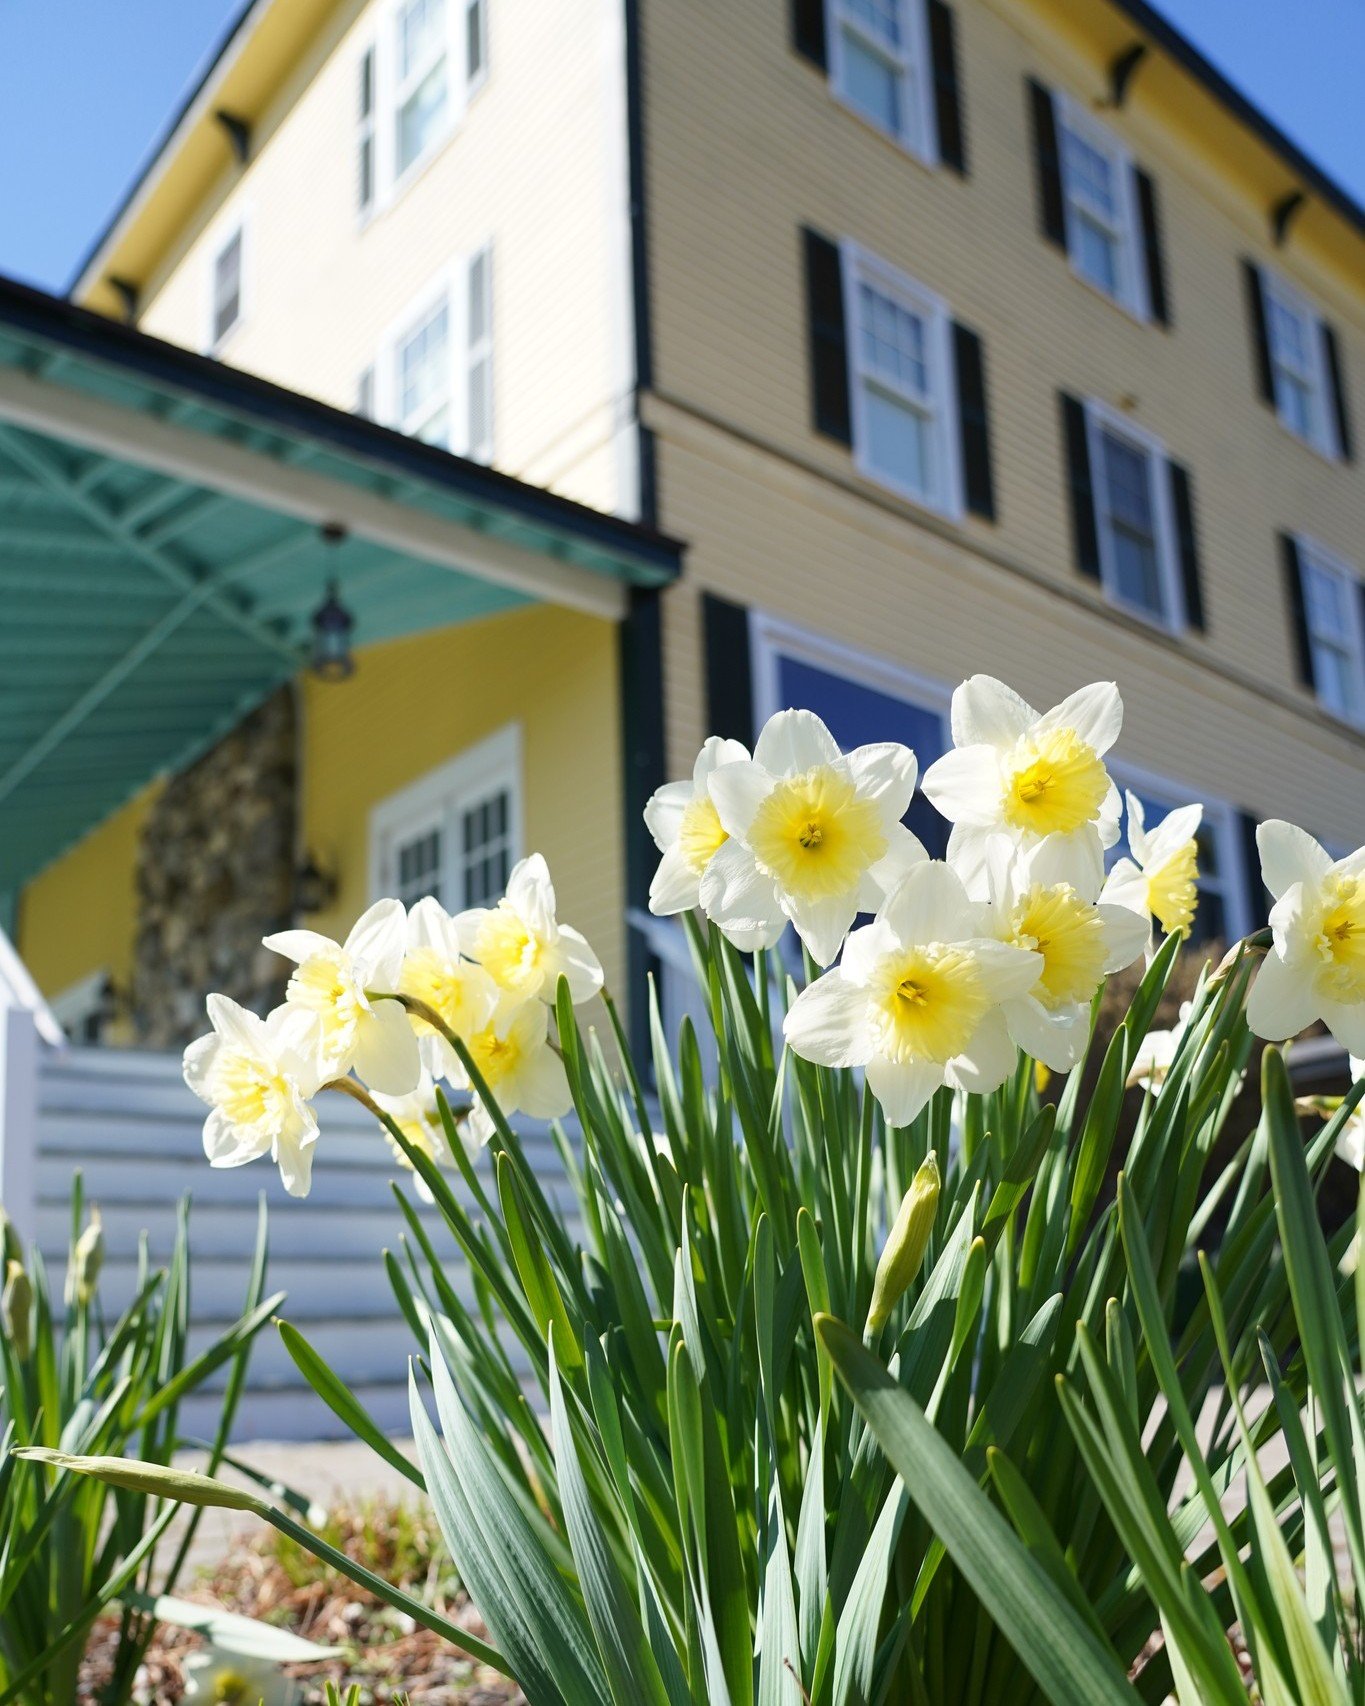 When the daffodils start to bloom, we know it's a sign that spring has arrived at the inn!🌼 

We are eagerly getting ready to open our doors to you and announce some exciting additions.

Mark your calendars for May 31st and we cannot wait to have yo